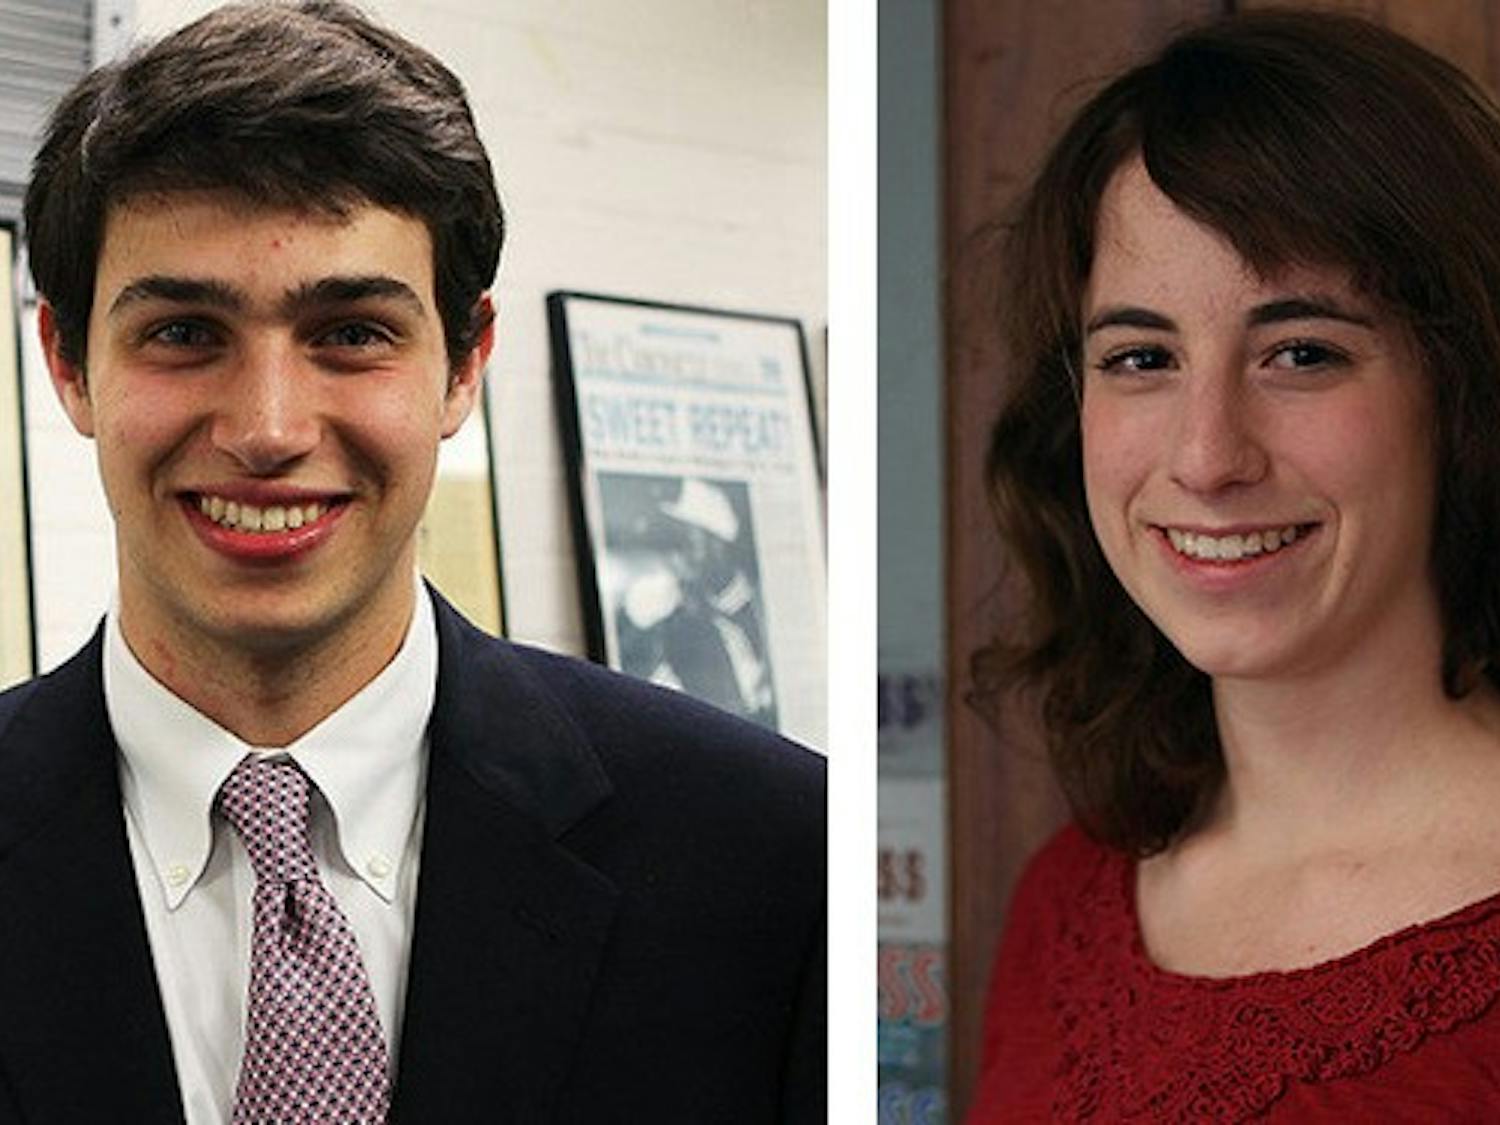 Daniel Carp (left) and Danielle Muoio (right) write about why thanksgiving break is so important.